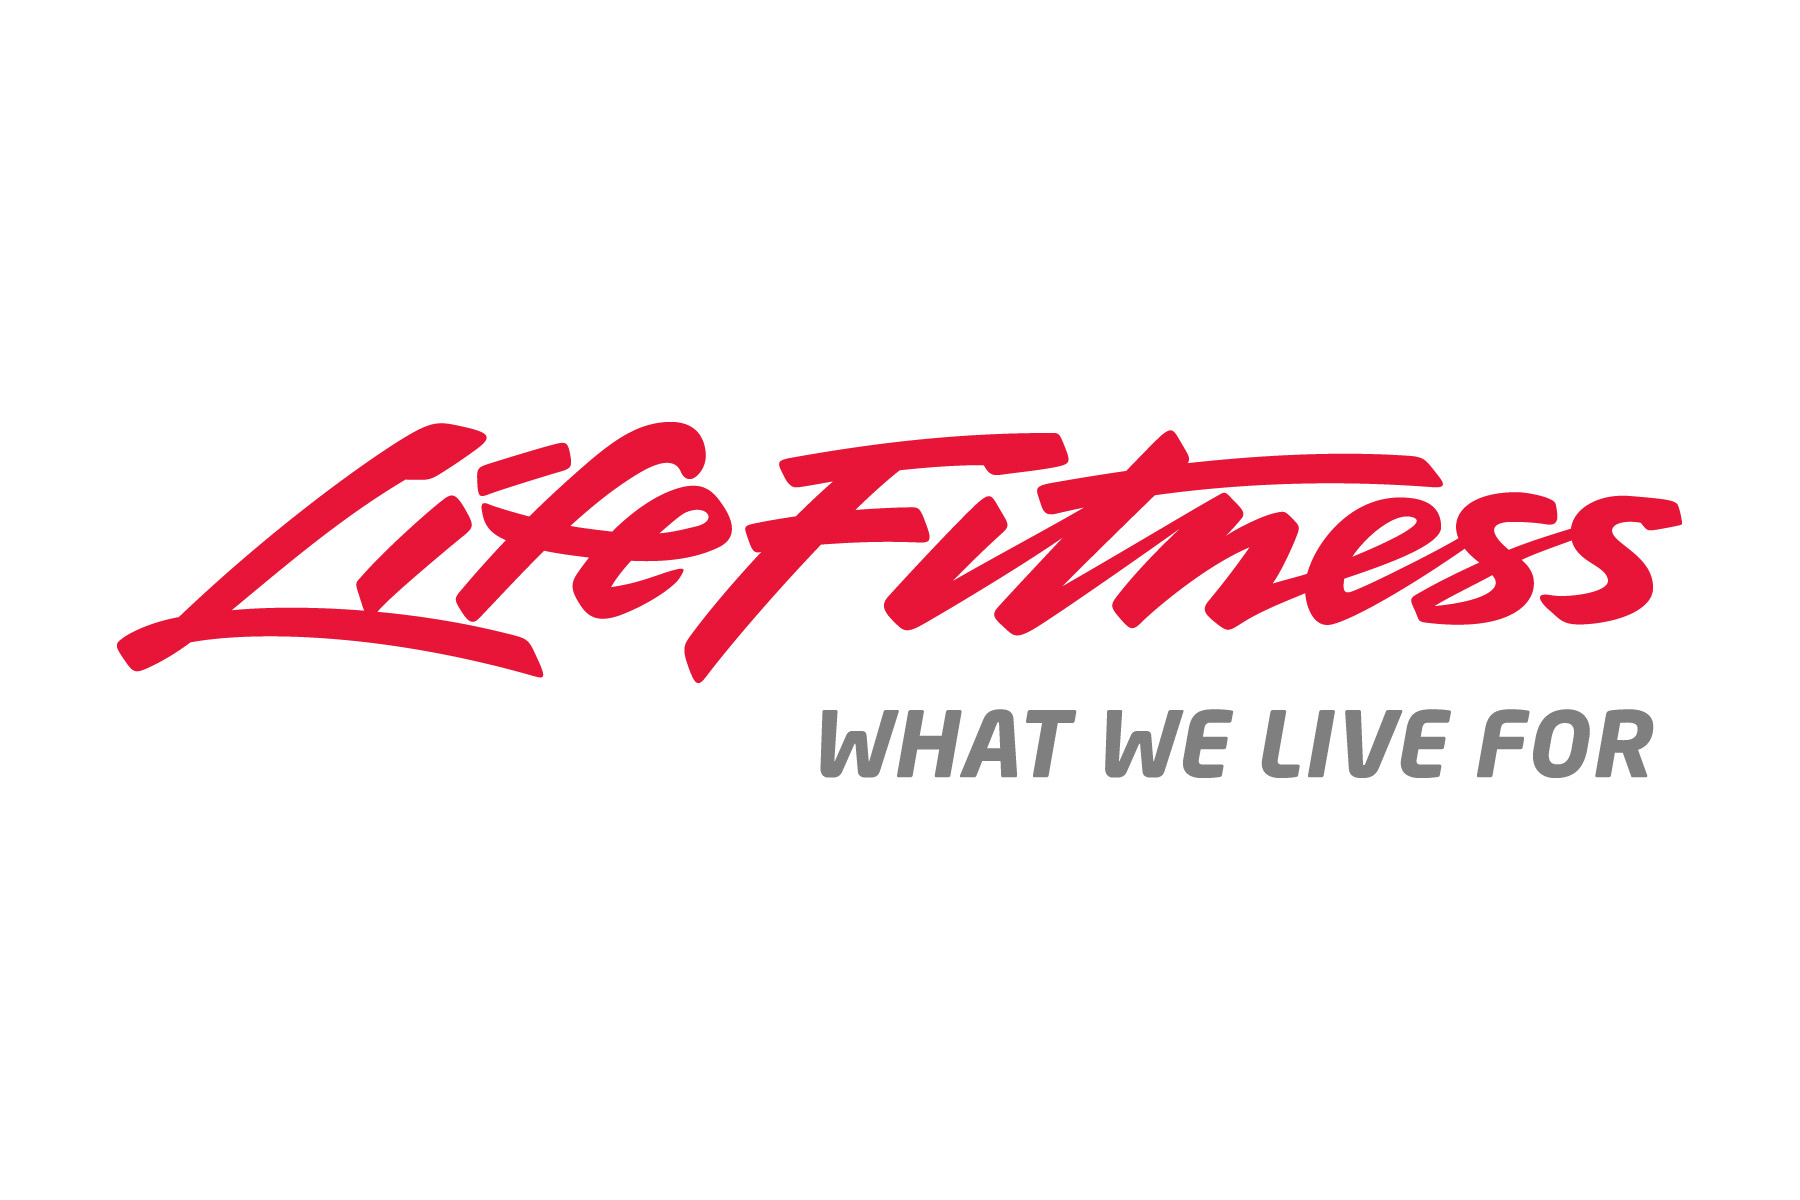 Life Fitness & Motionsoft Webinar Asks “Will Gym Members Leave for